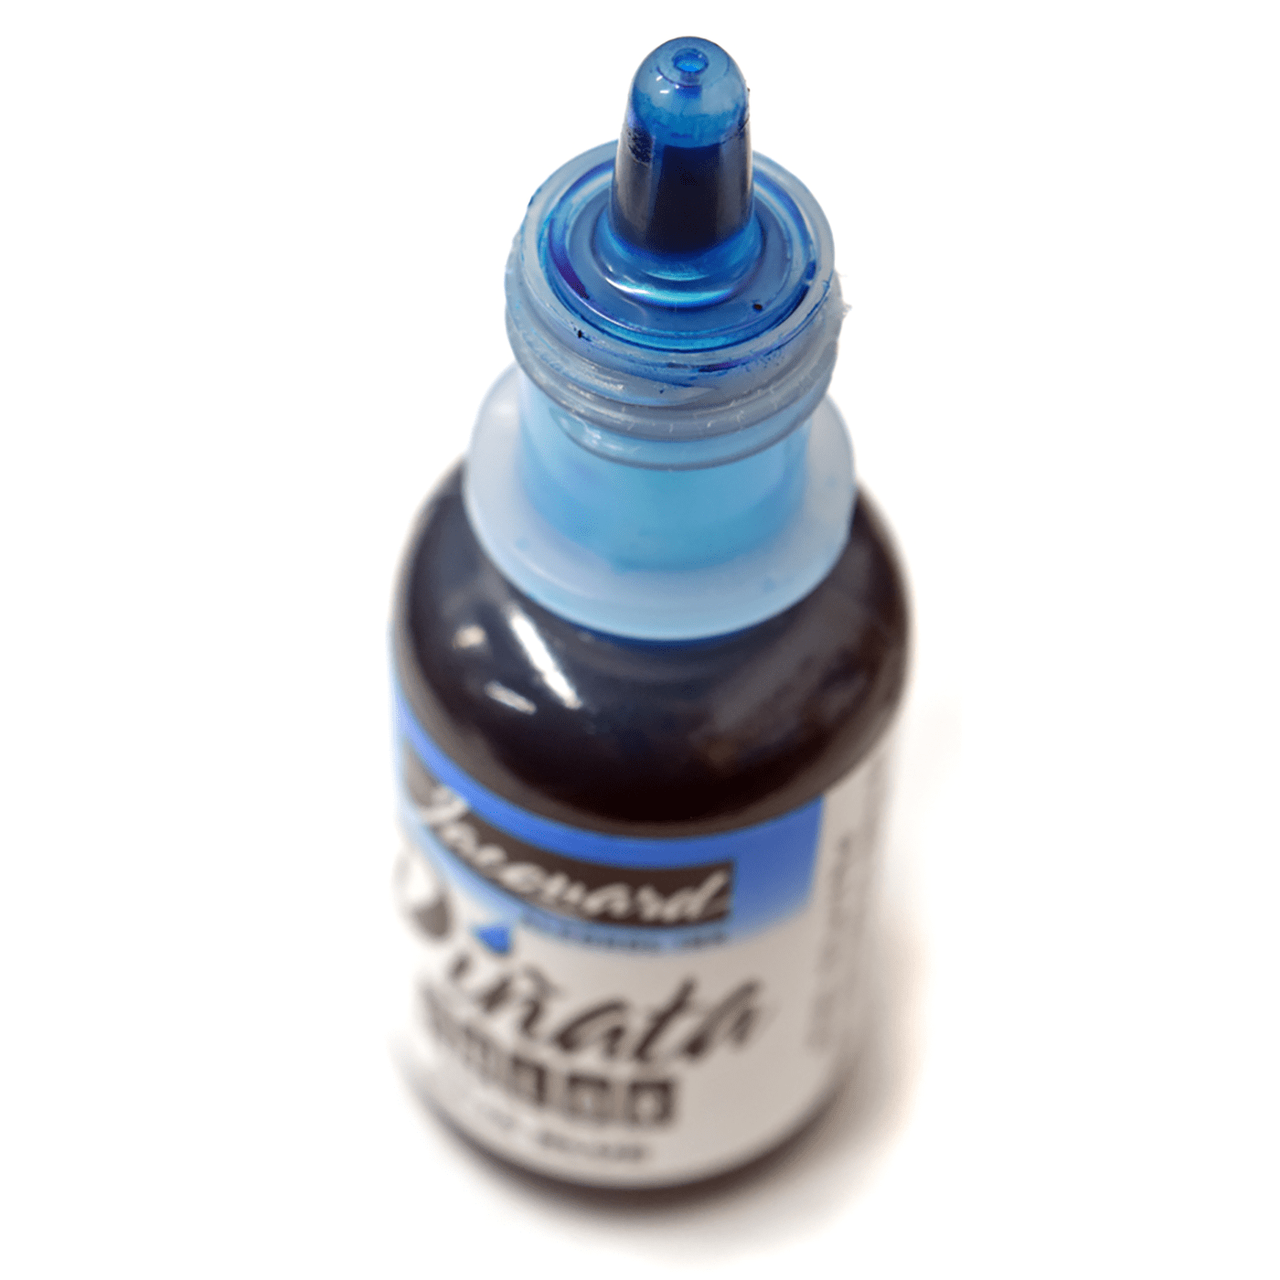 Jacquard Pinata Alcohol Ink Supplies Black and White Alcholol Inks With  Tools for sale online